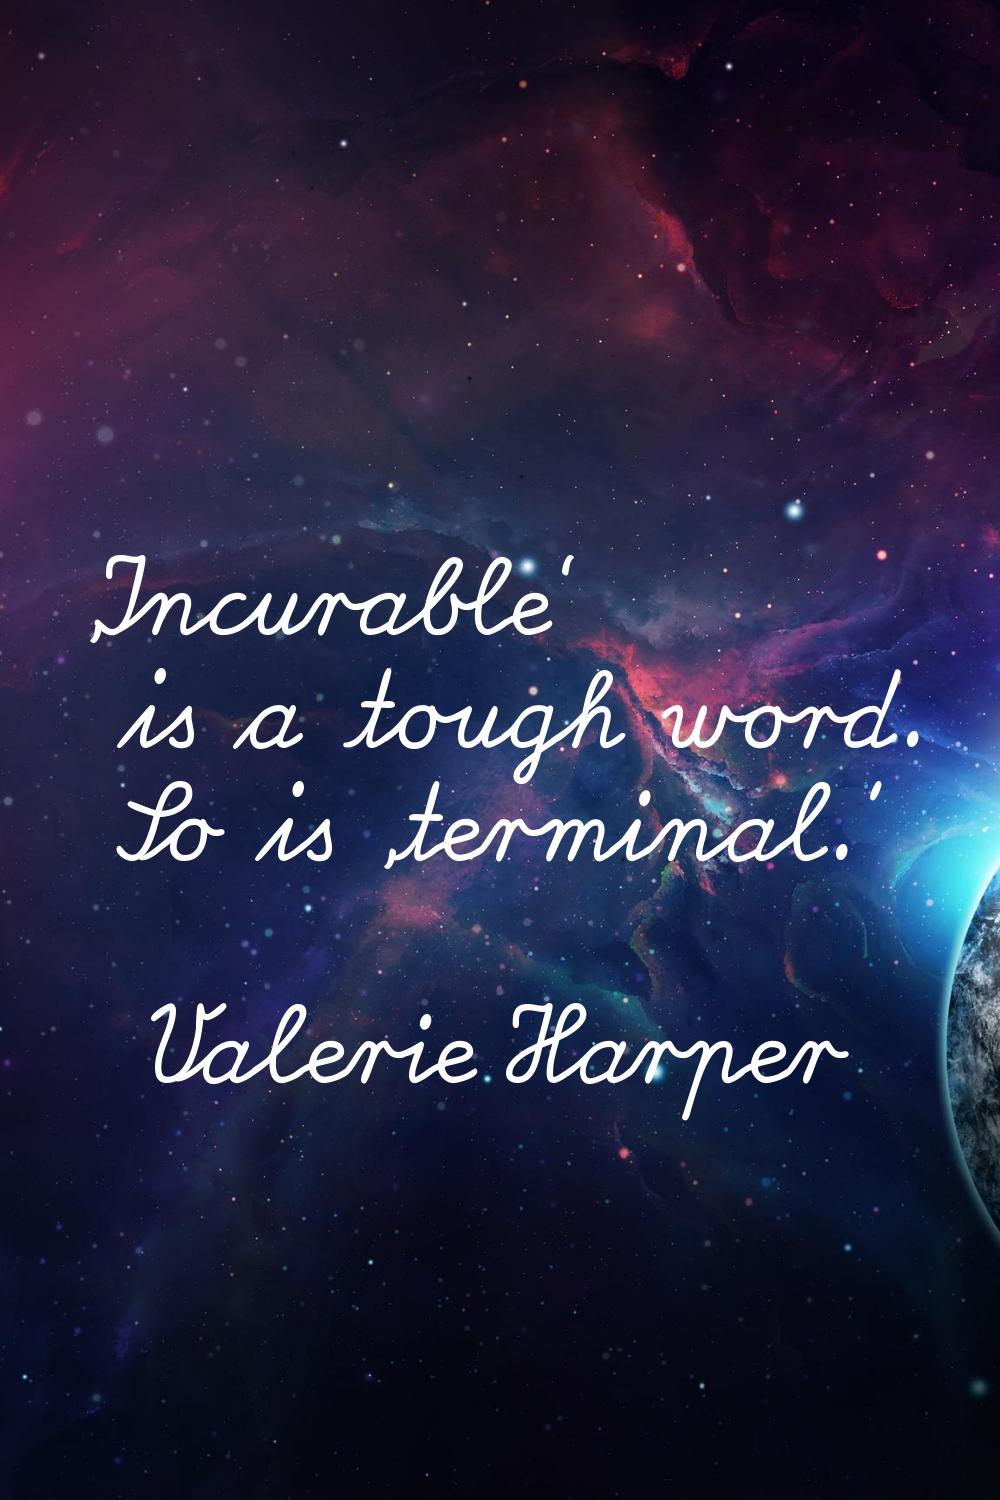 'Incurable' is a tough word. So is 'terminal.'